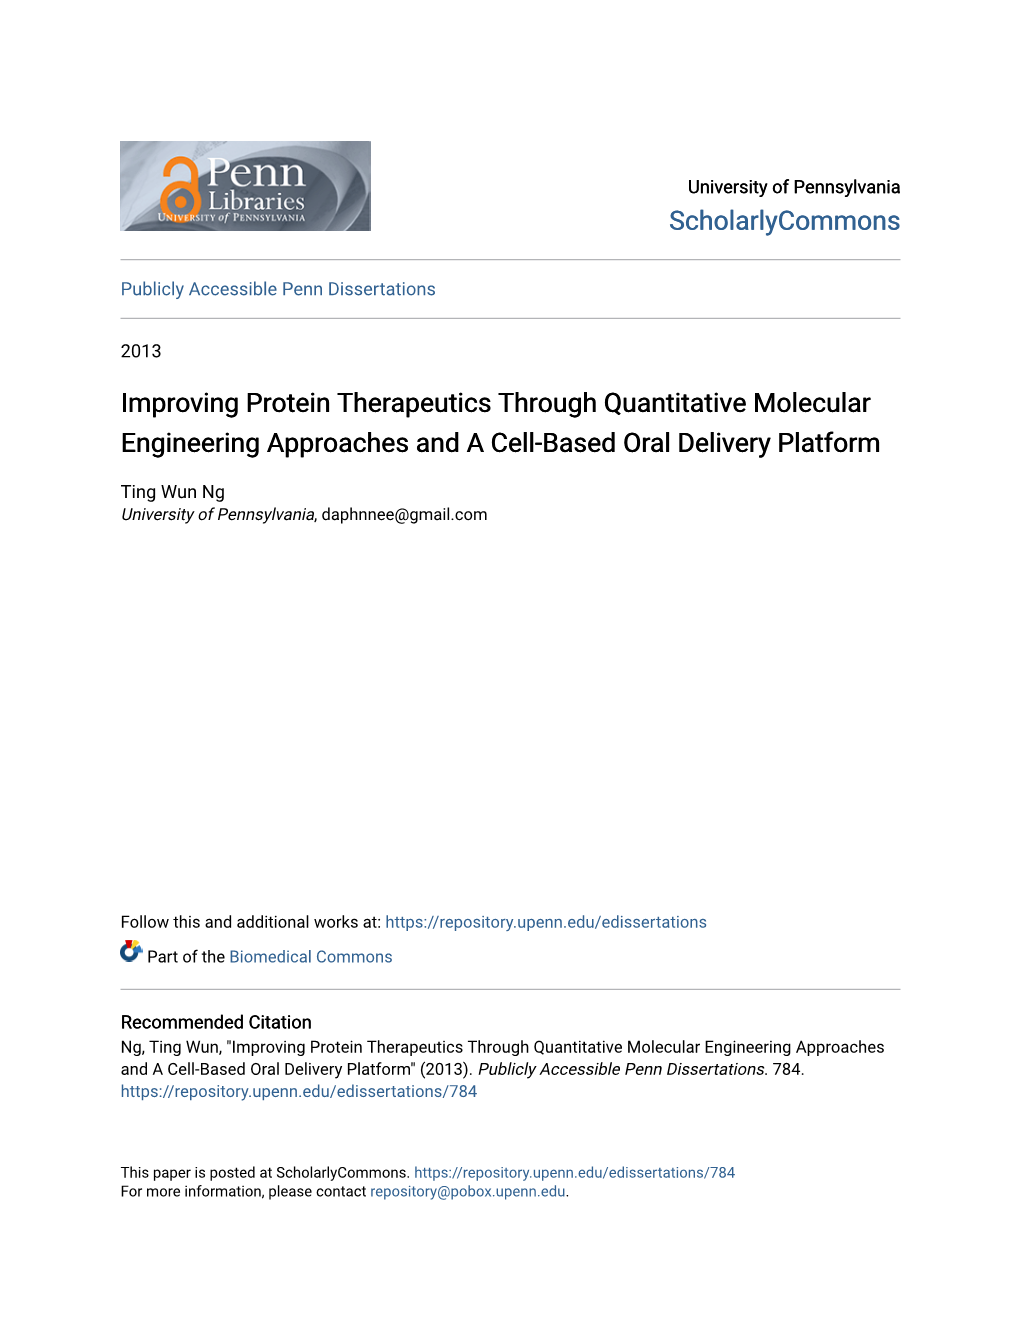 Improving Protein Therapeutics Through Quantitative Molecular Engineering Approaches and a Cell-Based Oral Delivery Platform